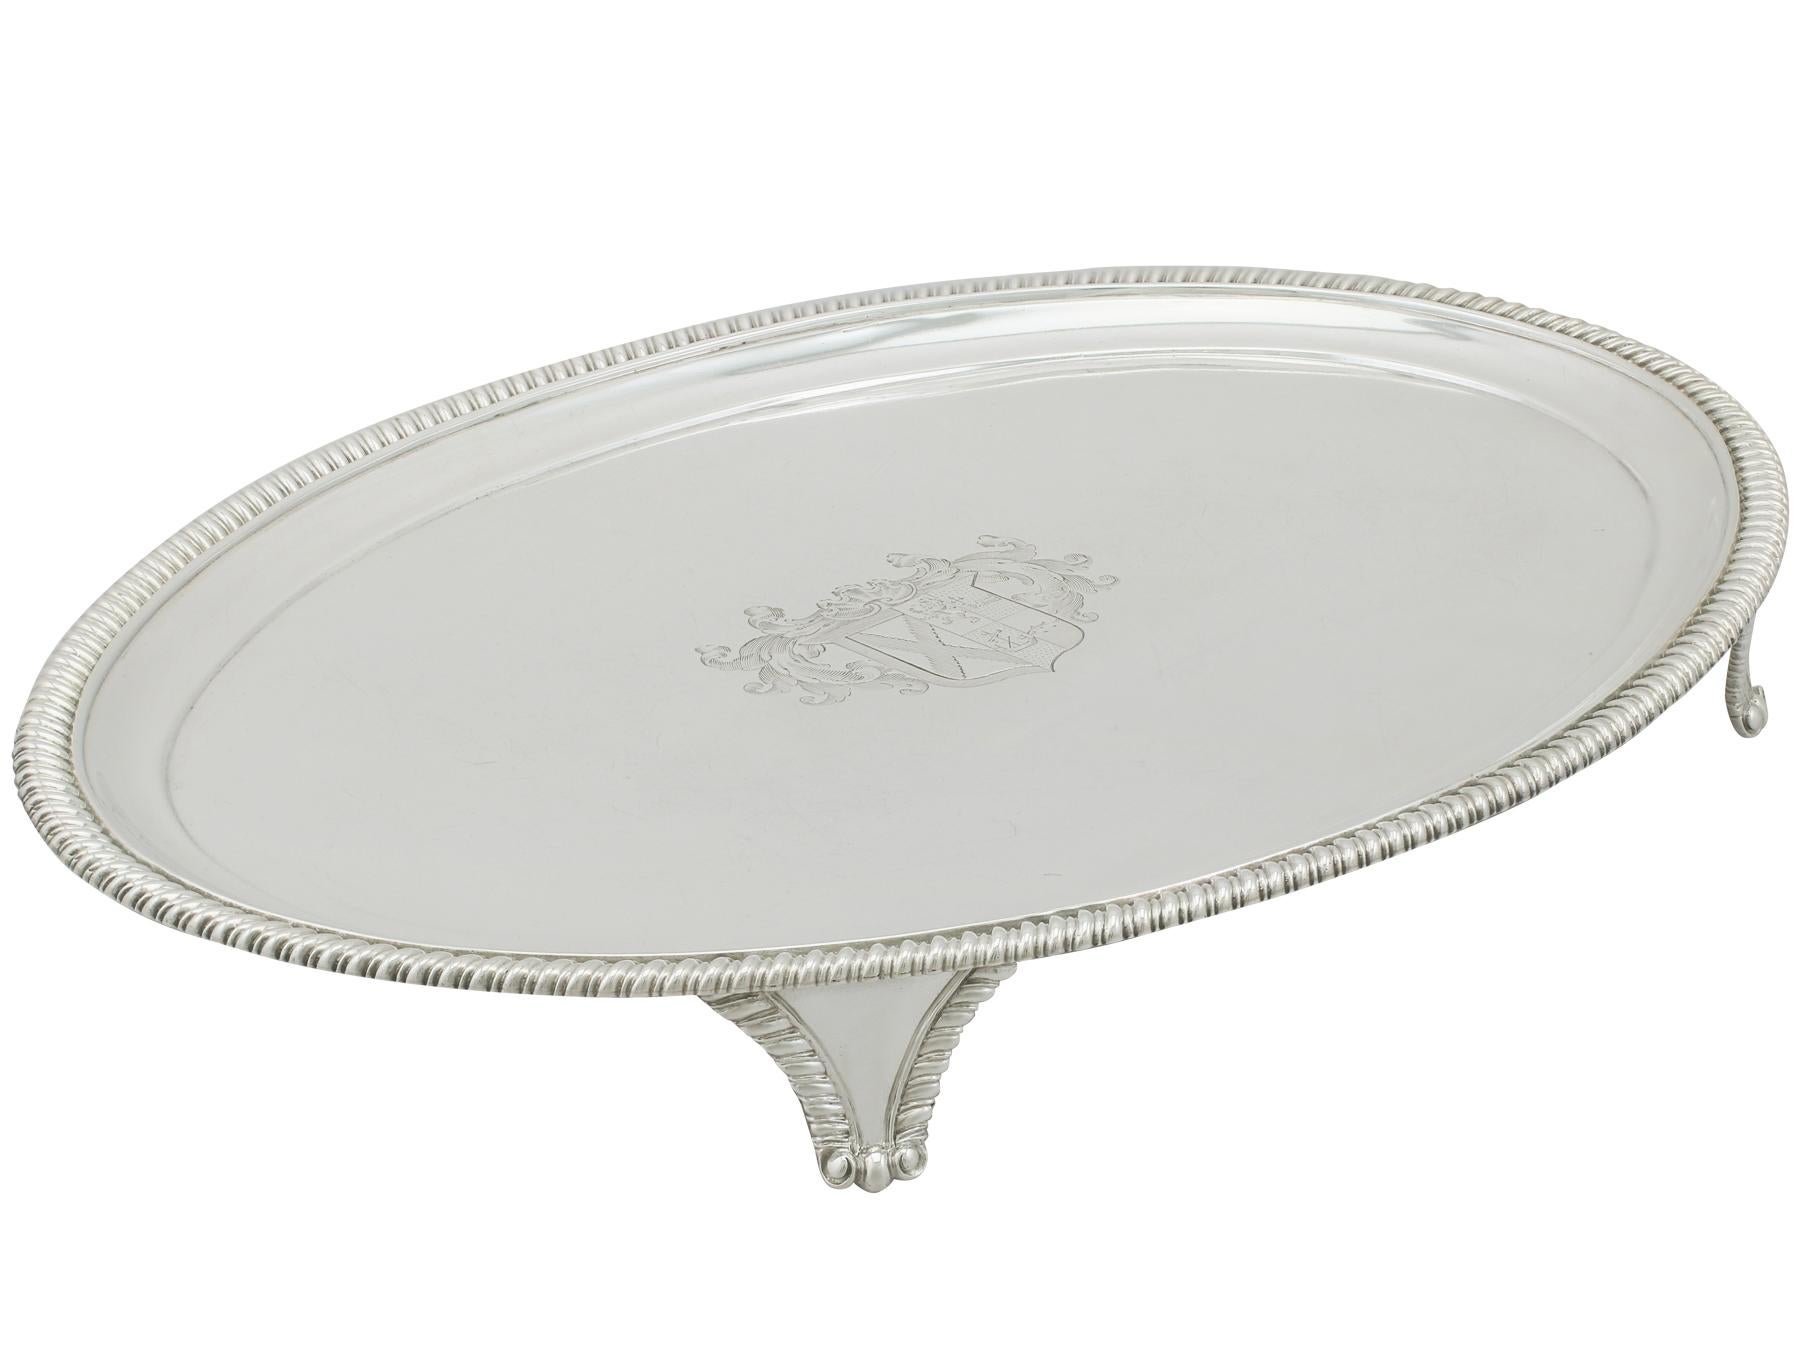 This fine antique George IV sterling silver salver has a plain oval, classic English form.


The surface of the salver is embellished with a fine and impressive contemporary bright cut engraved coat of arms with impressive scrolling leaf